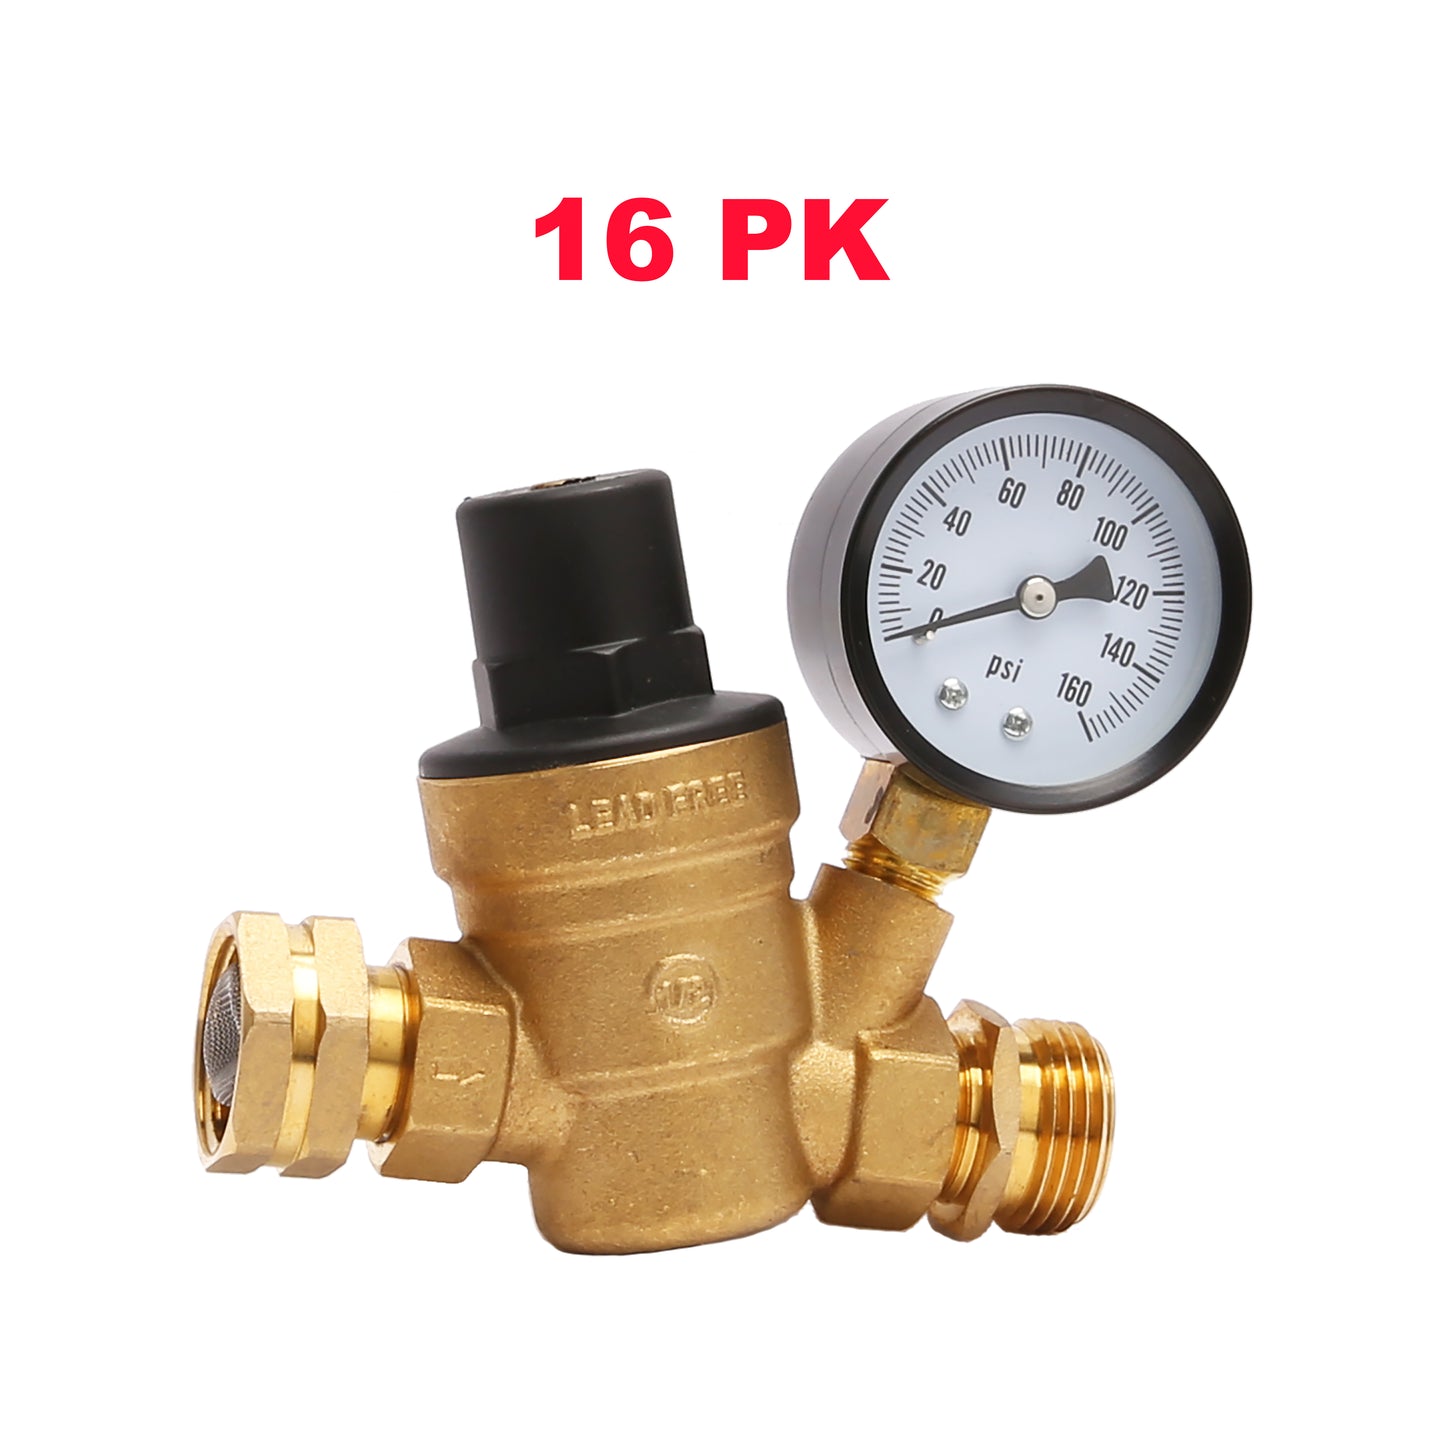 PTR0014 Water Pressure Regulator Valve for RV Camper, Lead-free Adjustable Brass RV Water Pressure Reducer with Gauge and Stainless Screened Filter - case of 16